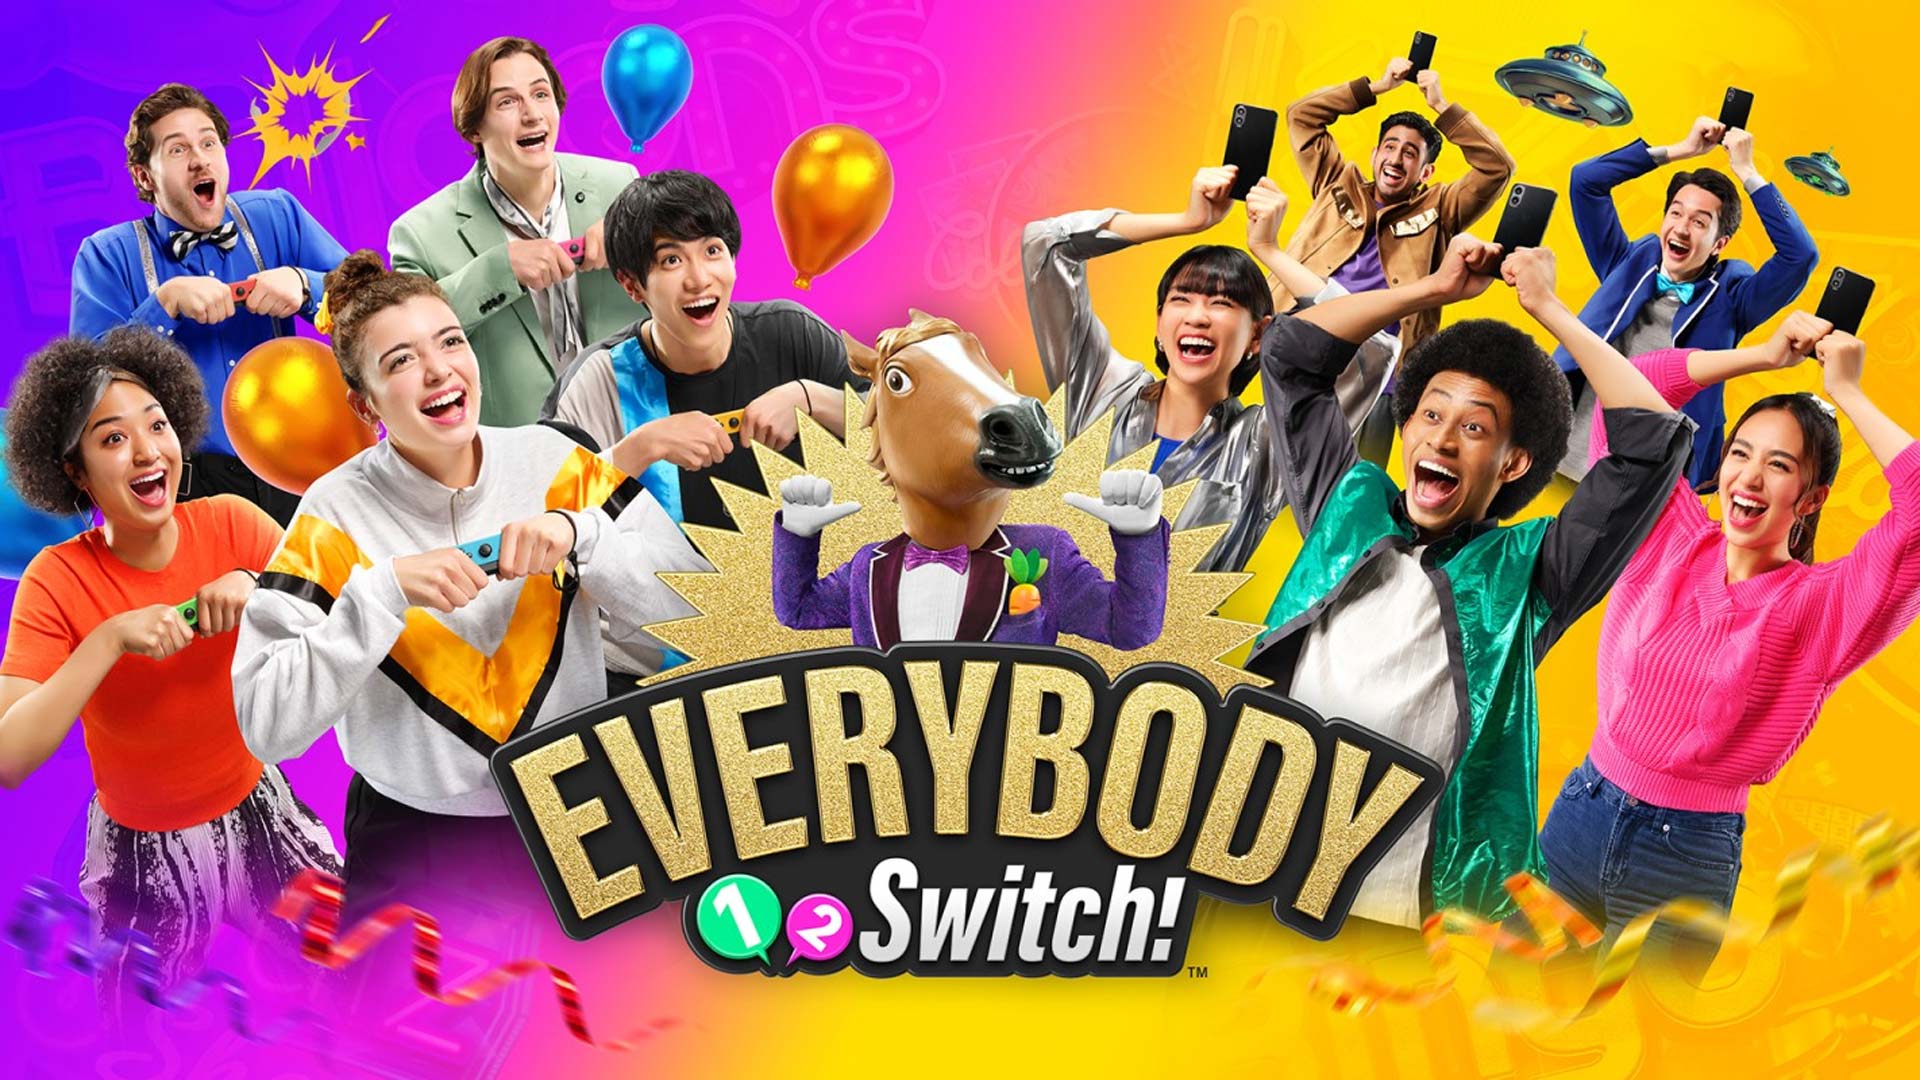 Nintendo reveals first details of Everybody 1-2 Switch!